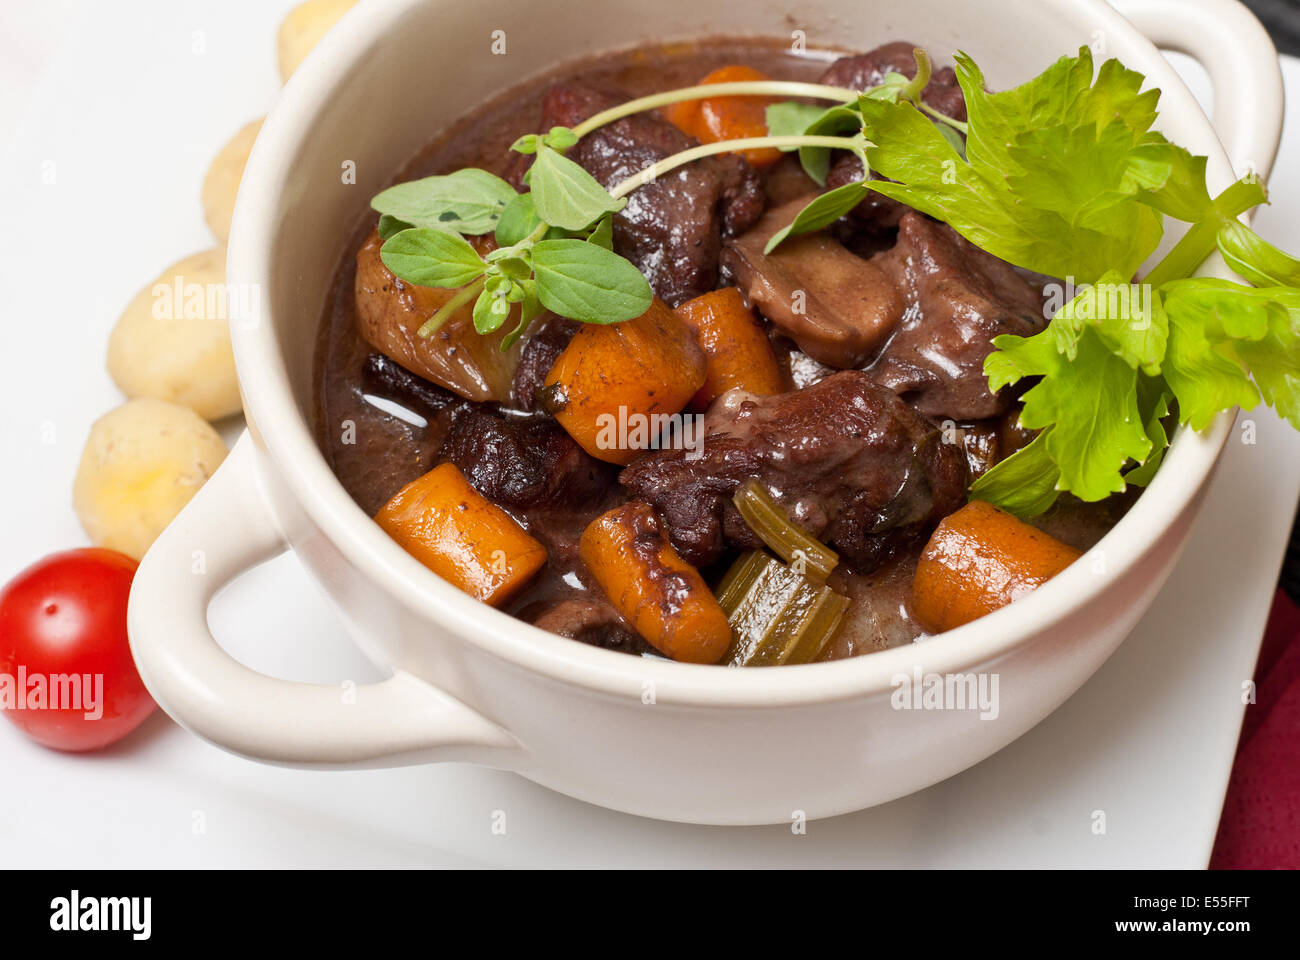 Boeuf bourguignon with carrots, onions and mushrooms Stock Photo